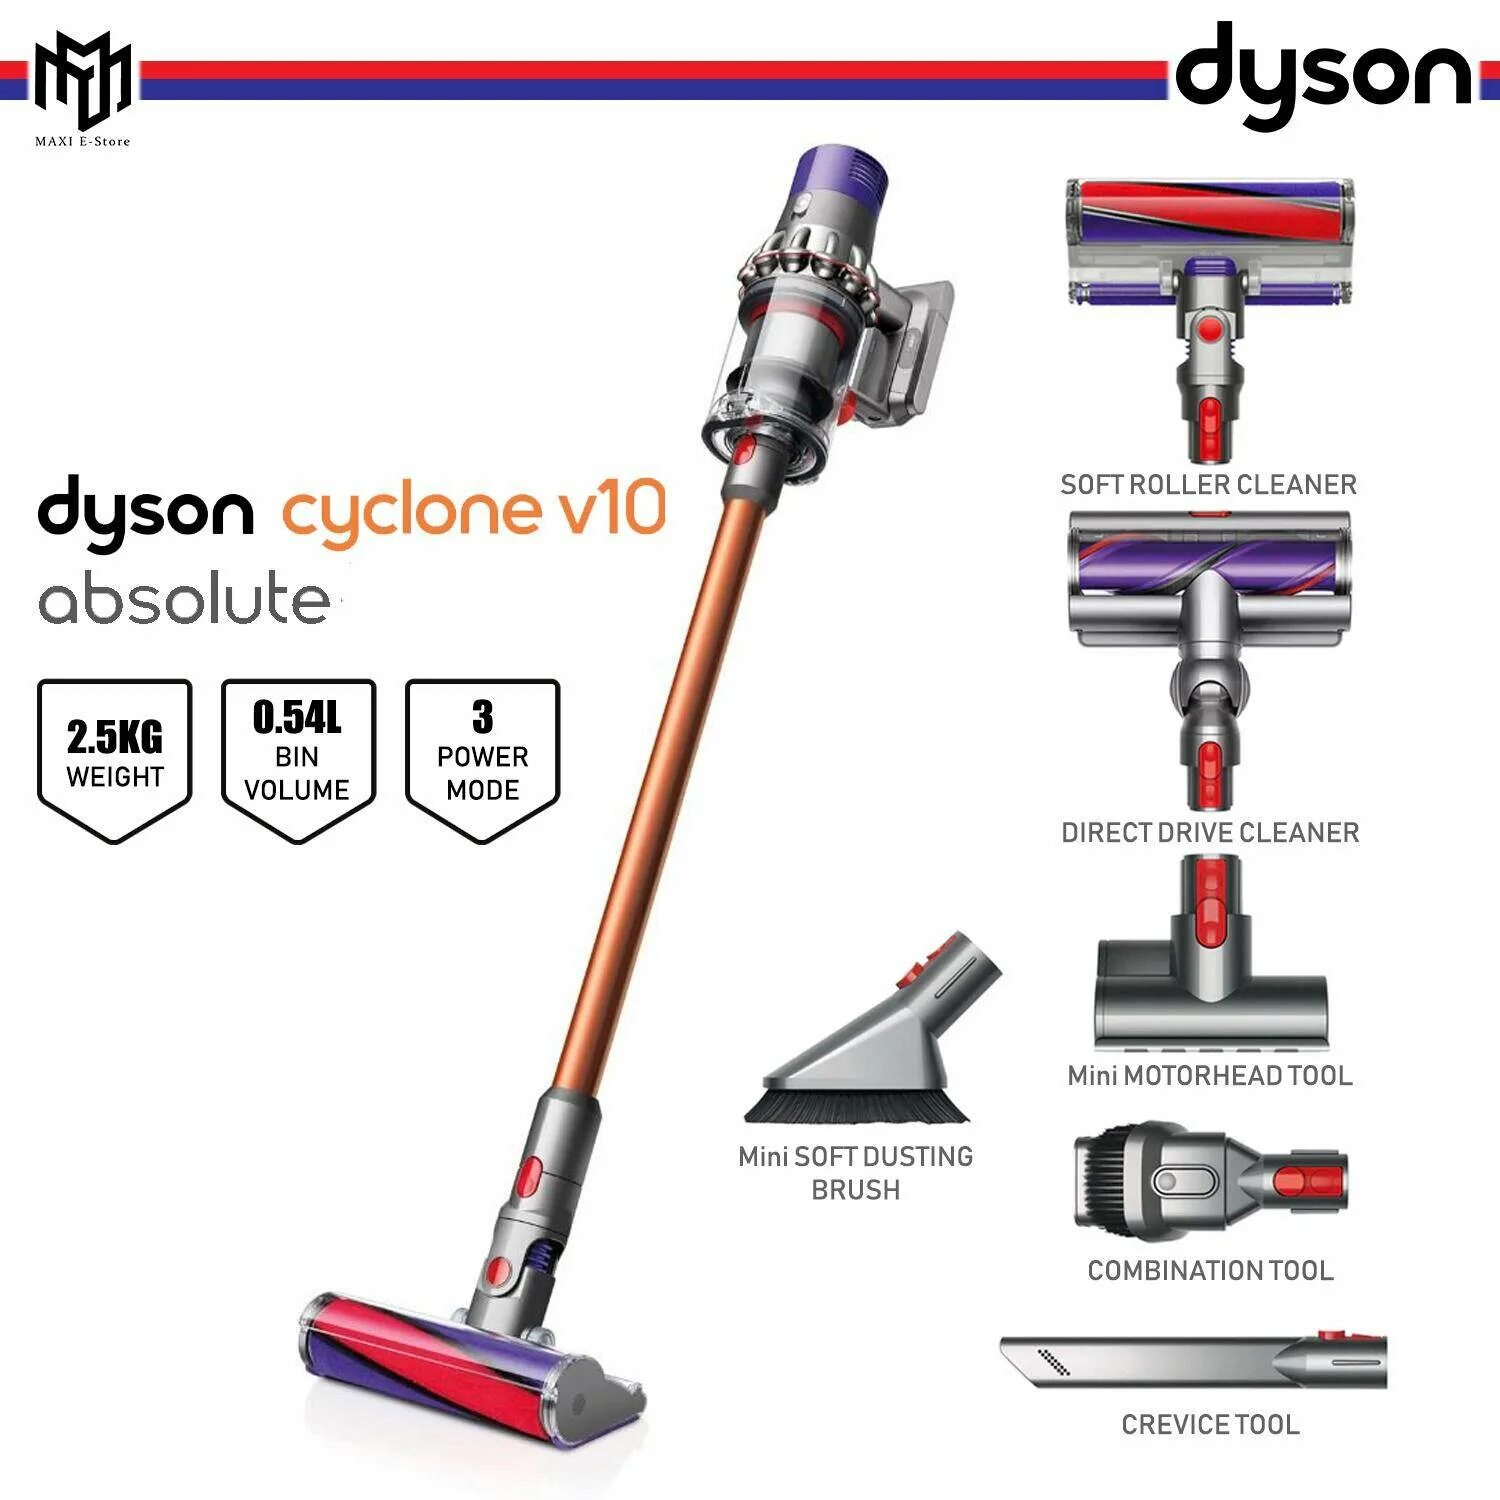 Absolute 10. Дайсон v10 absolute. Dyson Cyclone v10. Пылесос Dyson v10 absolute. Dyson Cyclone v10 absolute.